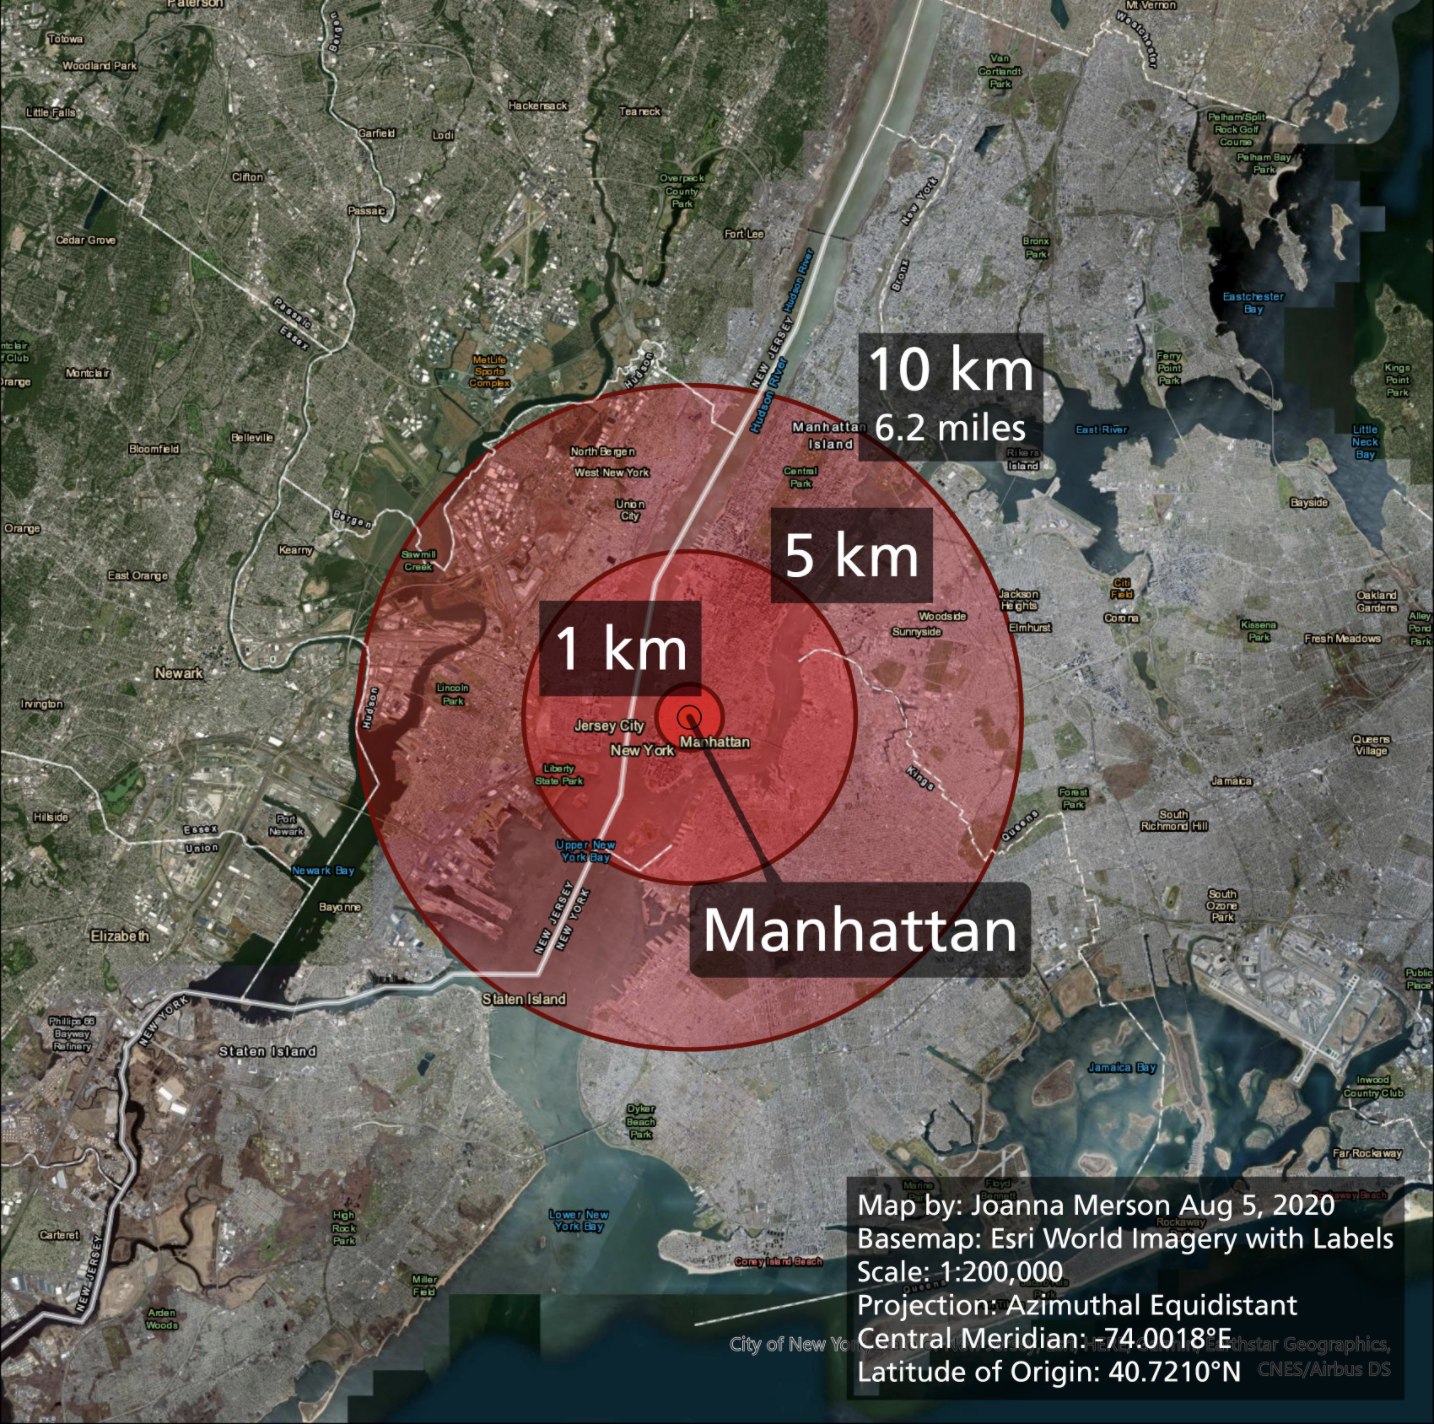 Screenshot of a map visualization by Joanna Merson made on August 5 2020, with a basemap from esri World Imagery using a scale 1:200,000 and the Azimuthal Equidistant projection. Map is centered over New York City with an epicenter of Manhattan labeled and circle radii of 1km, 5km, and 10km clearly labeled.